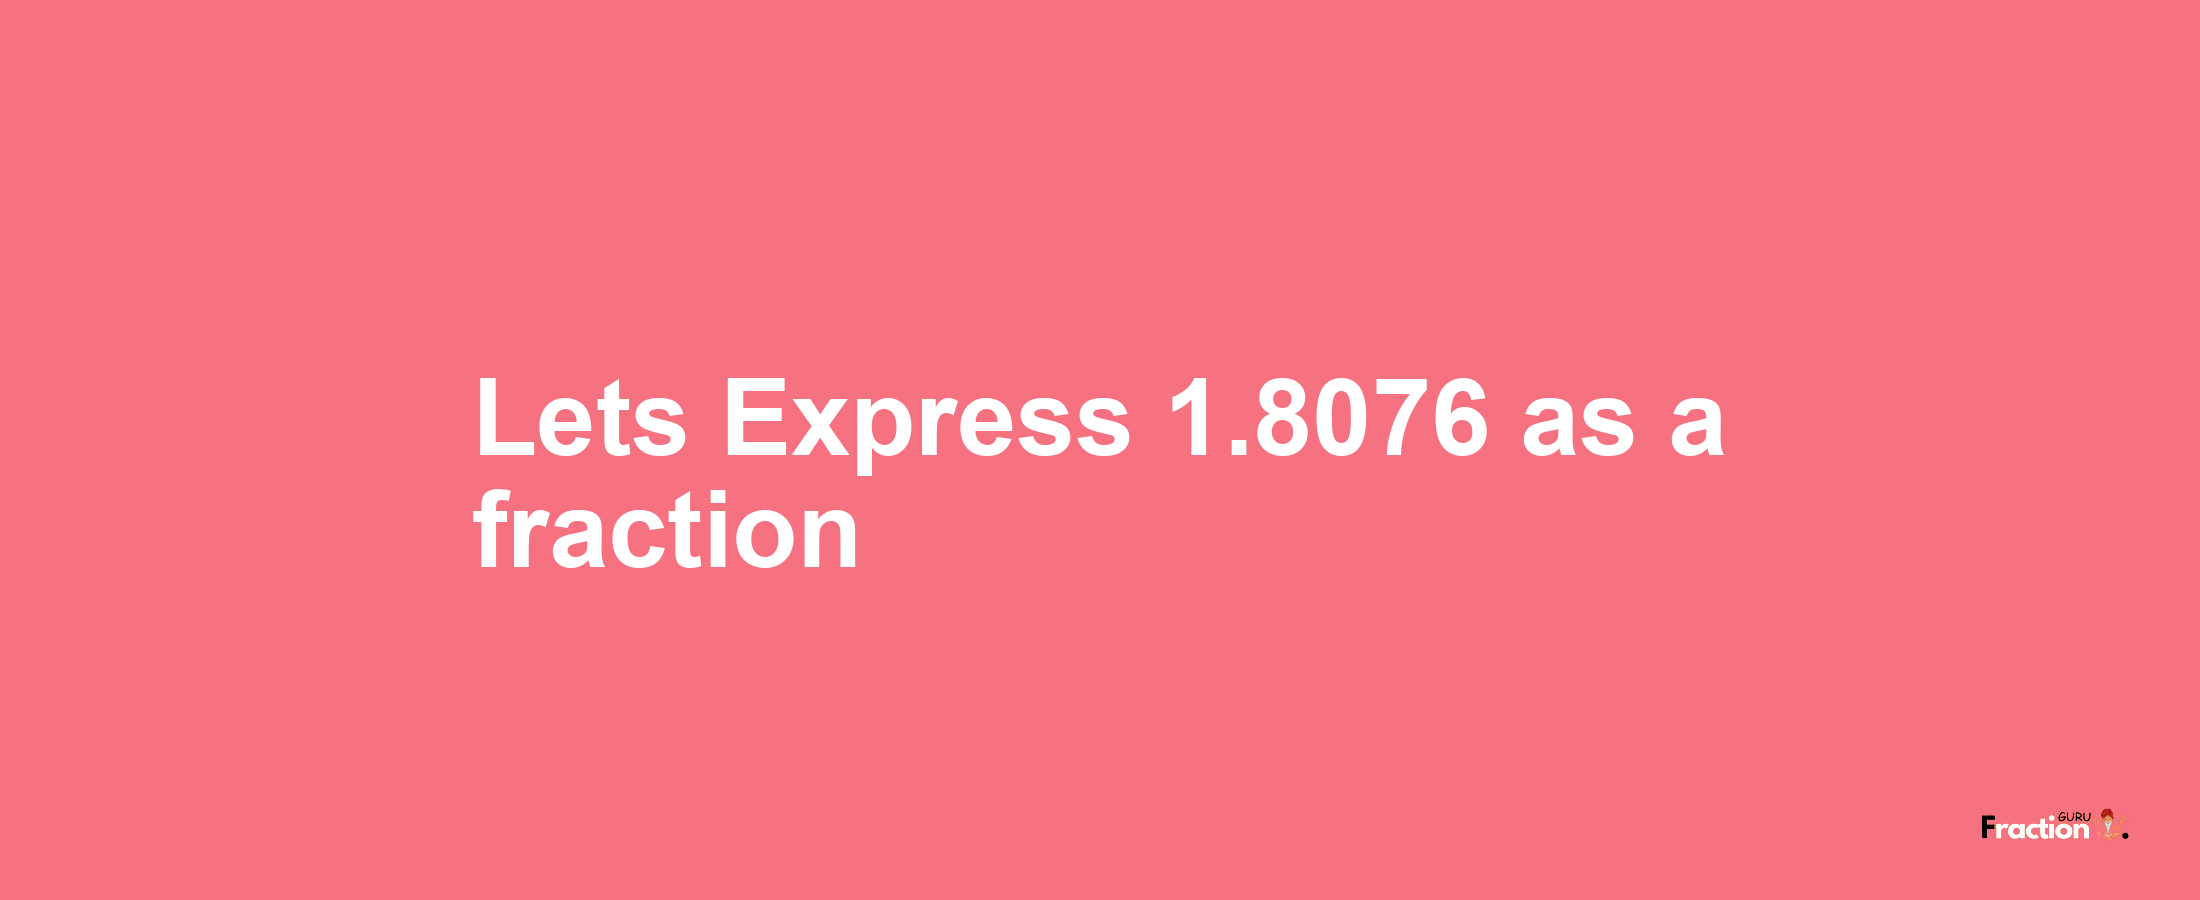 Lets Express 1.8076 as afraction